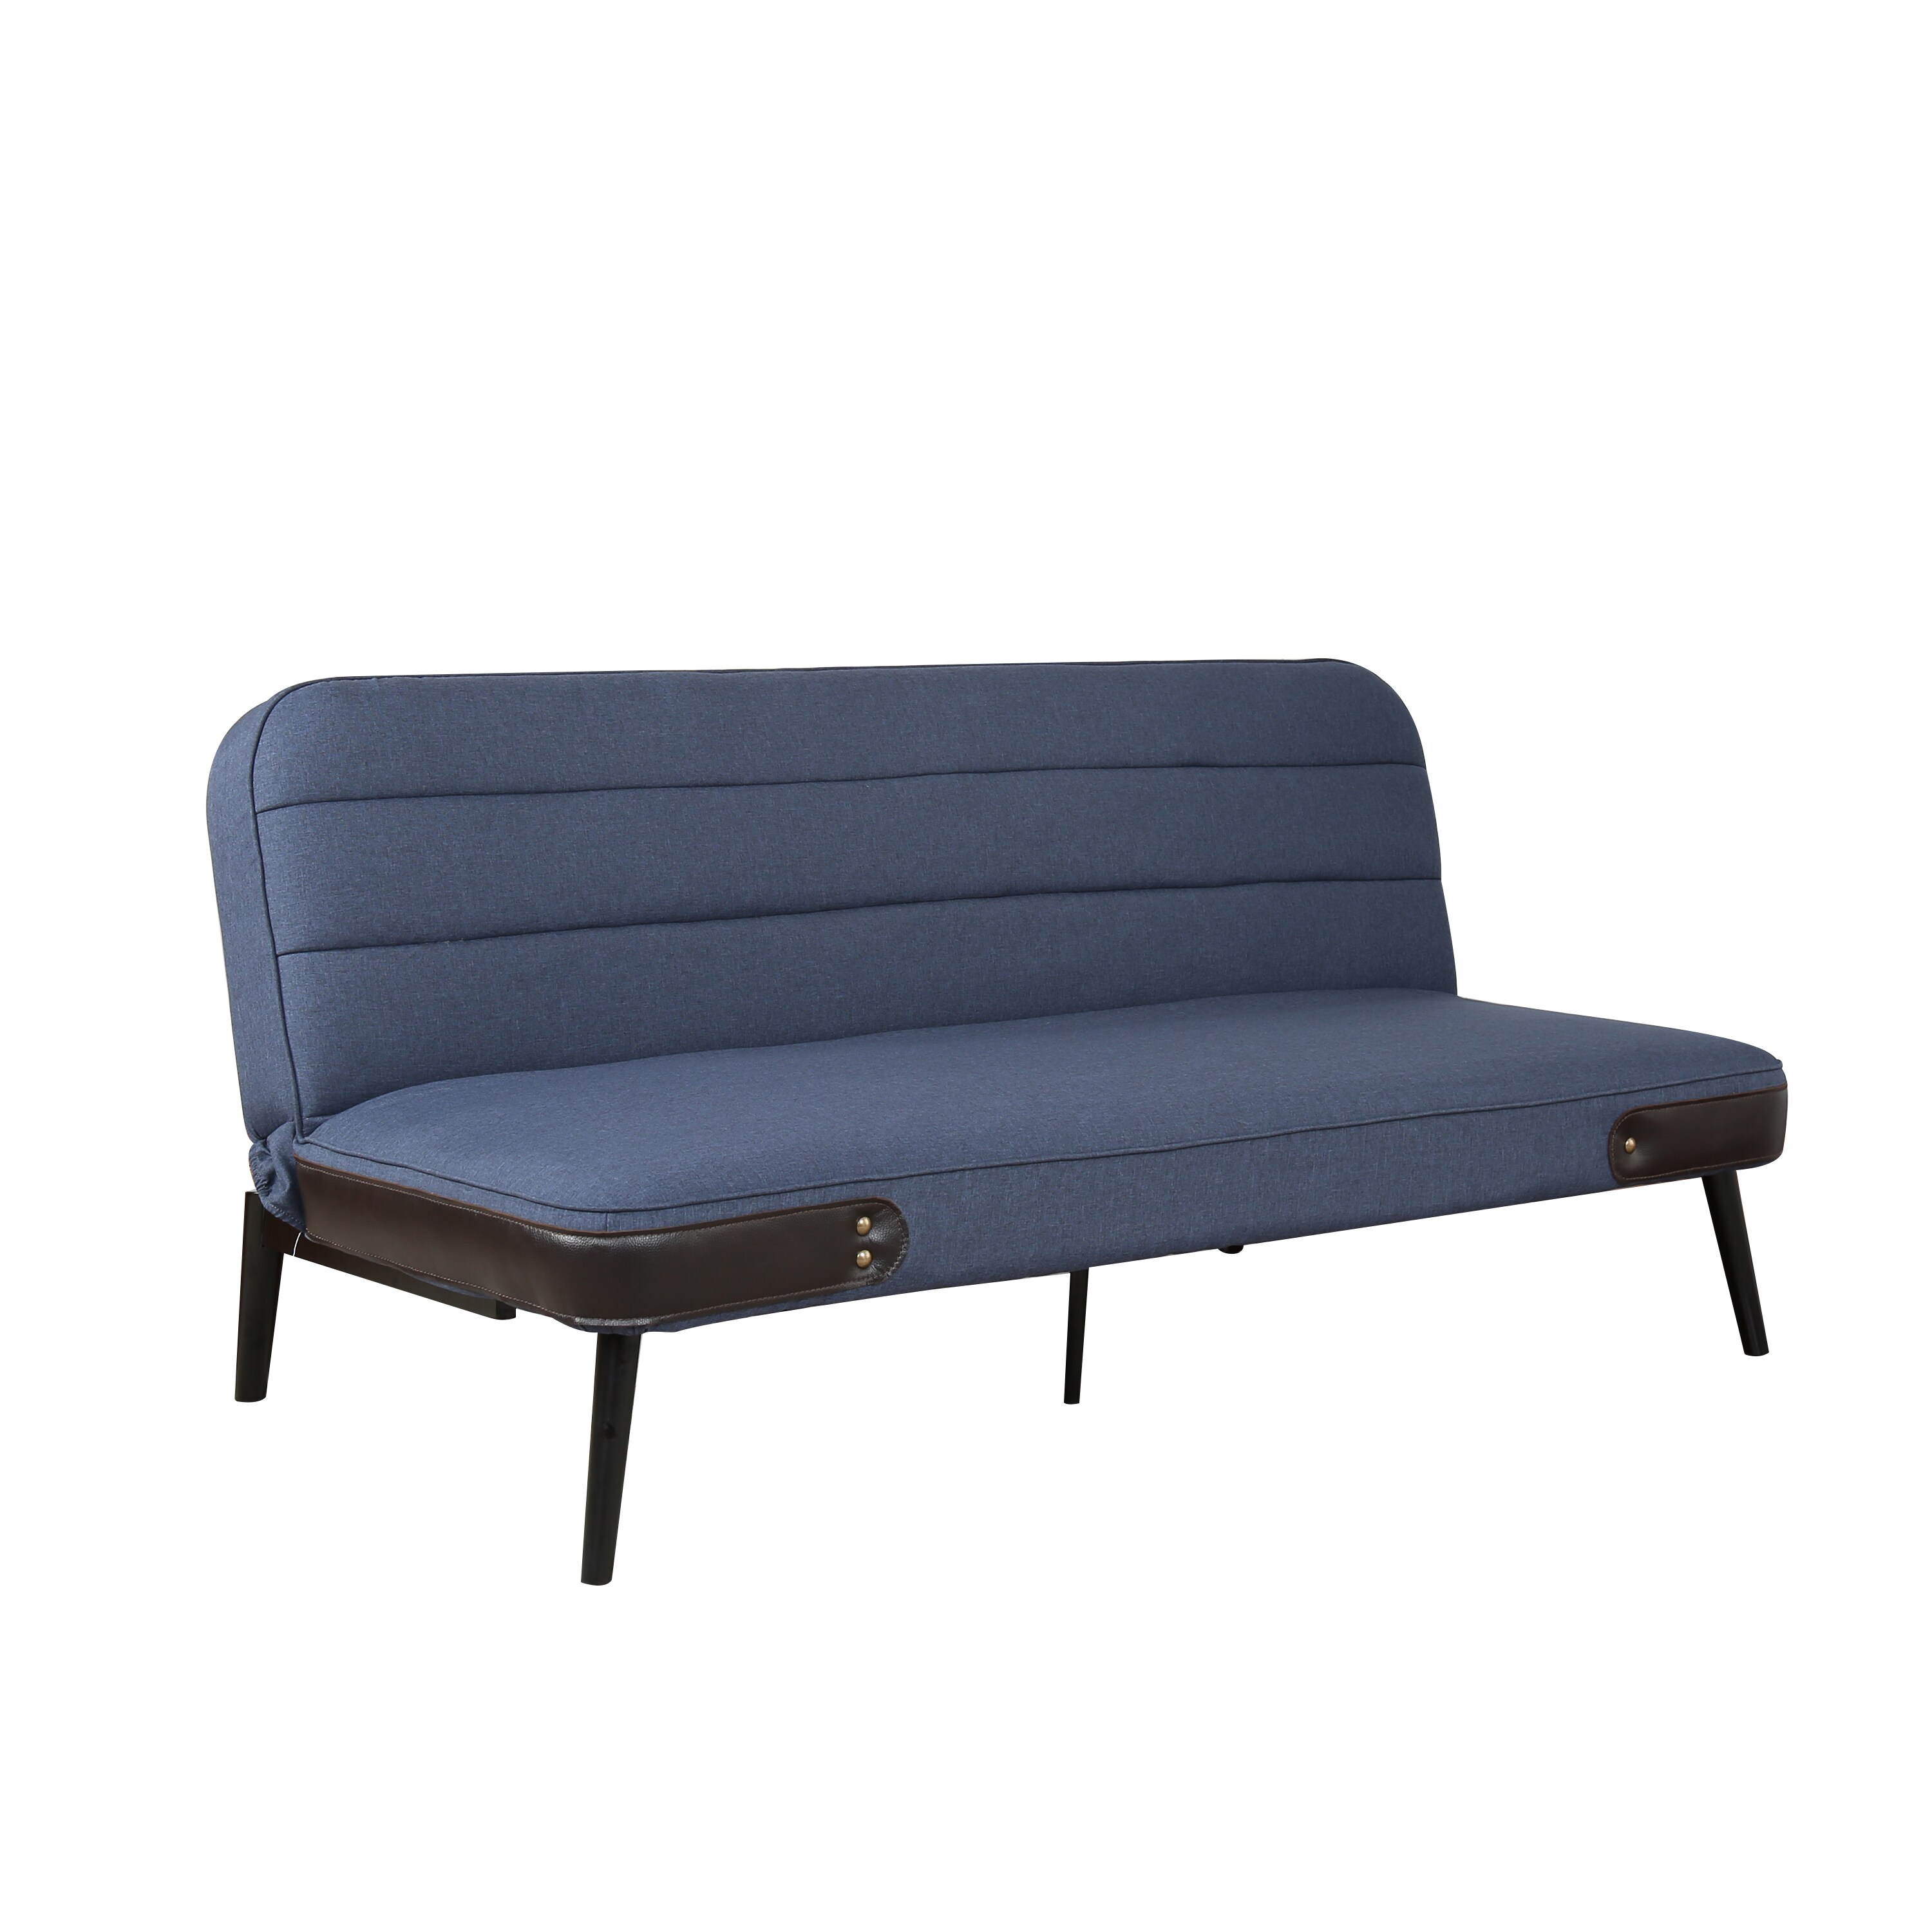 AC Pacific Daisy Blue Contemporary/Modern Polyester Full Futon the Futons & Sofa Beds department at Lowes.com